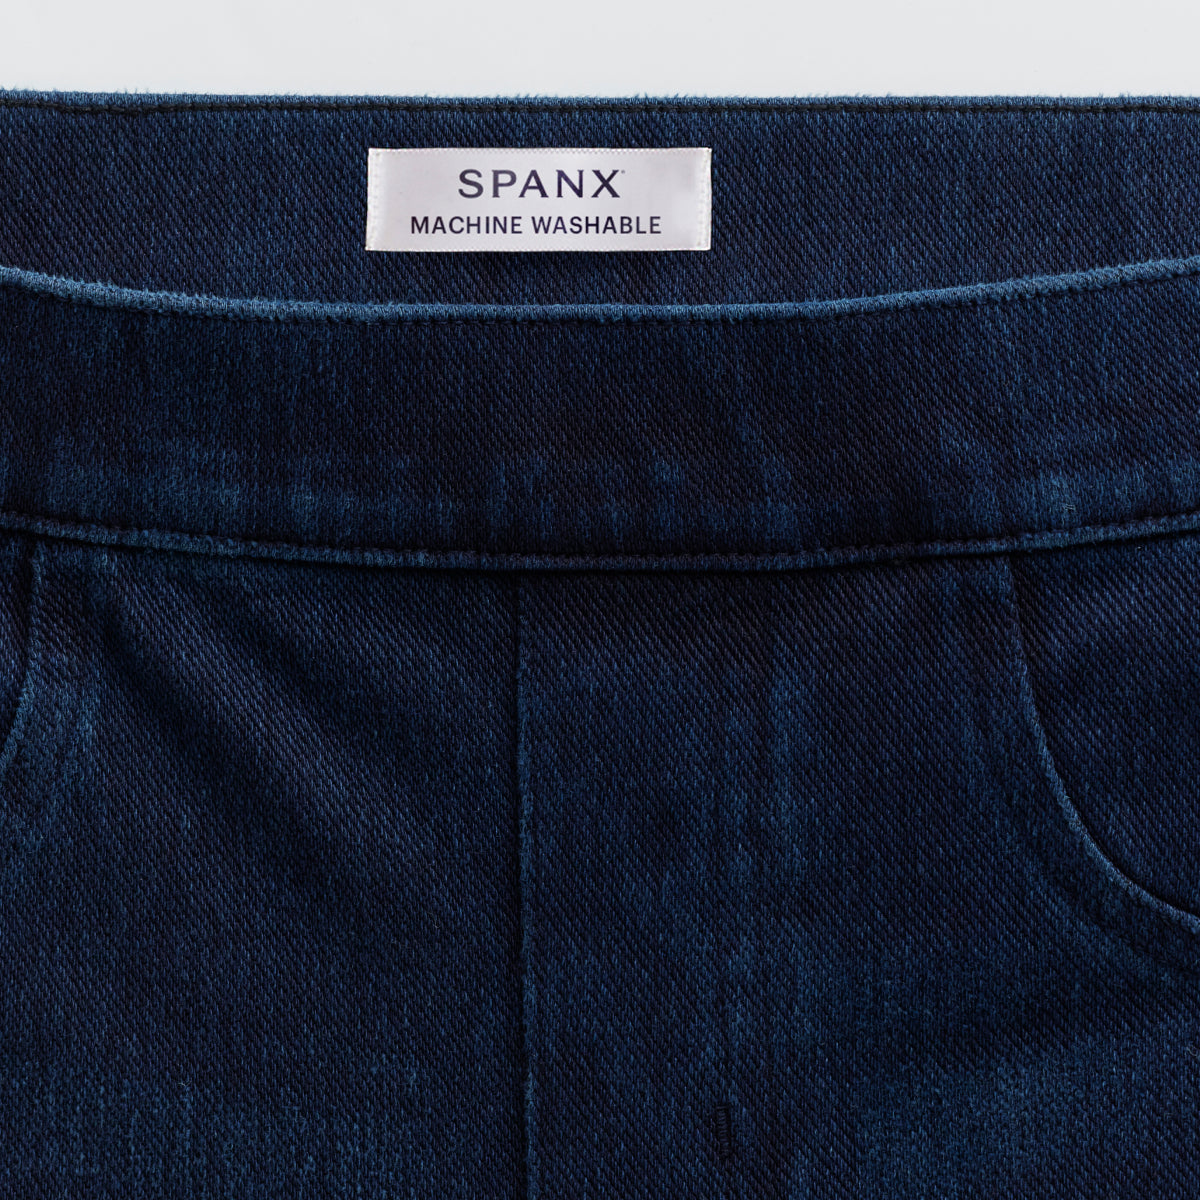 SPANX - You know the drill: new season, new Jean-ish Leggings